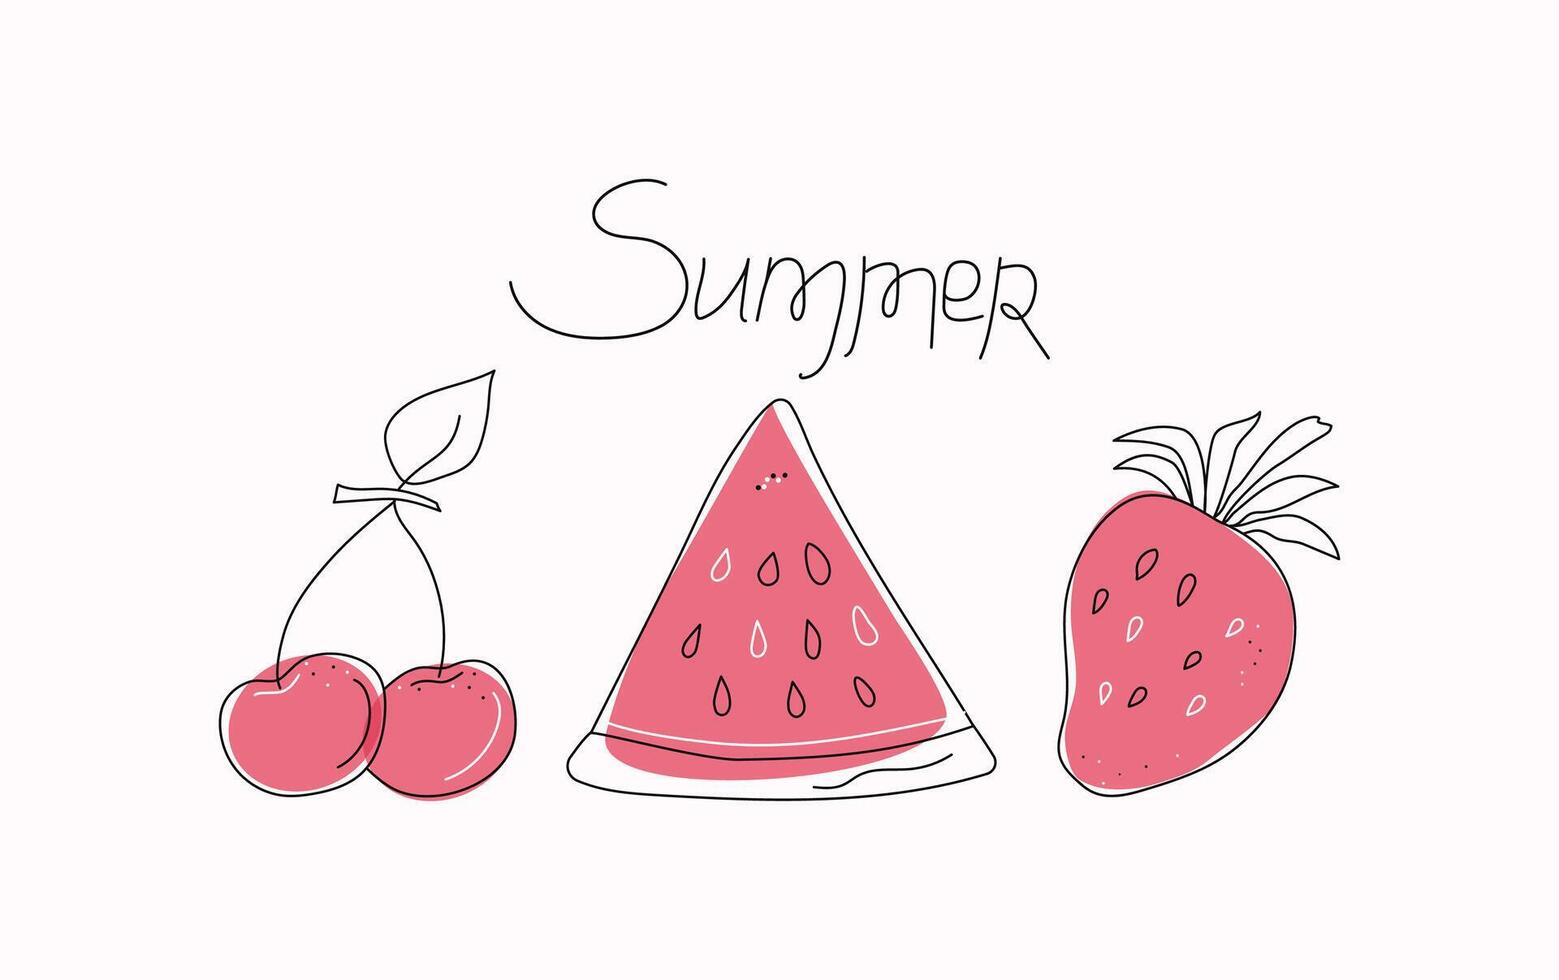 Abstract drawings of fruits and berries. Summer, hand lettering. Strawberry, watermelon and cherry. Line icons with colored spots. Doodles. illustration vector